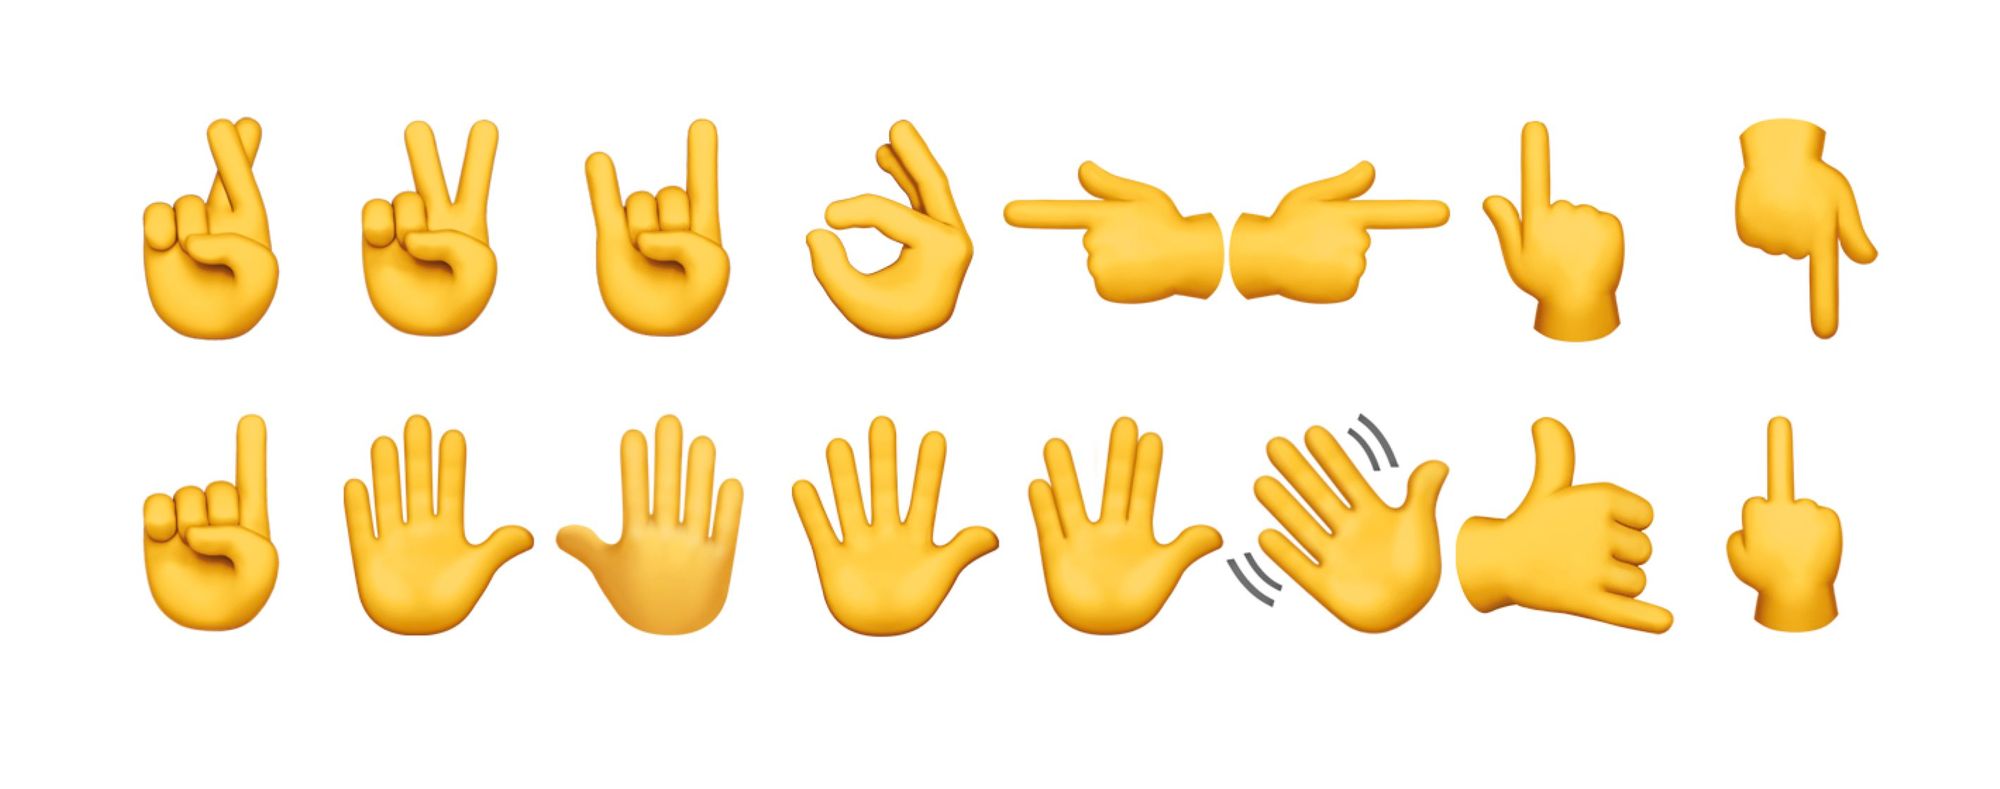 from Peter Edberg (Apple) and the Emoji Subcommittee for 10 separate hand g...